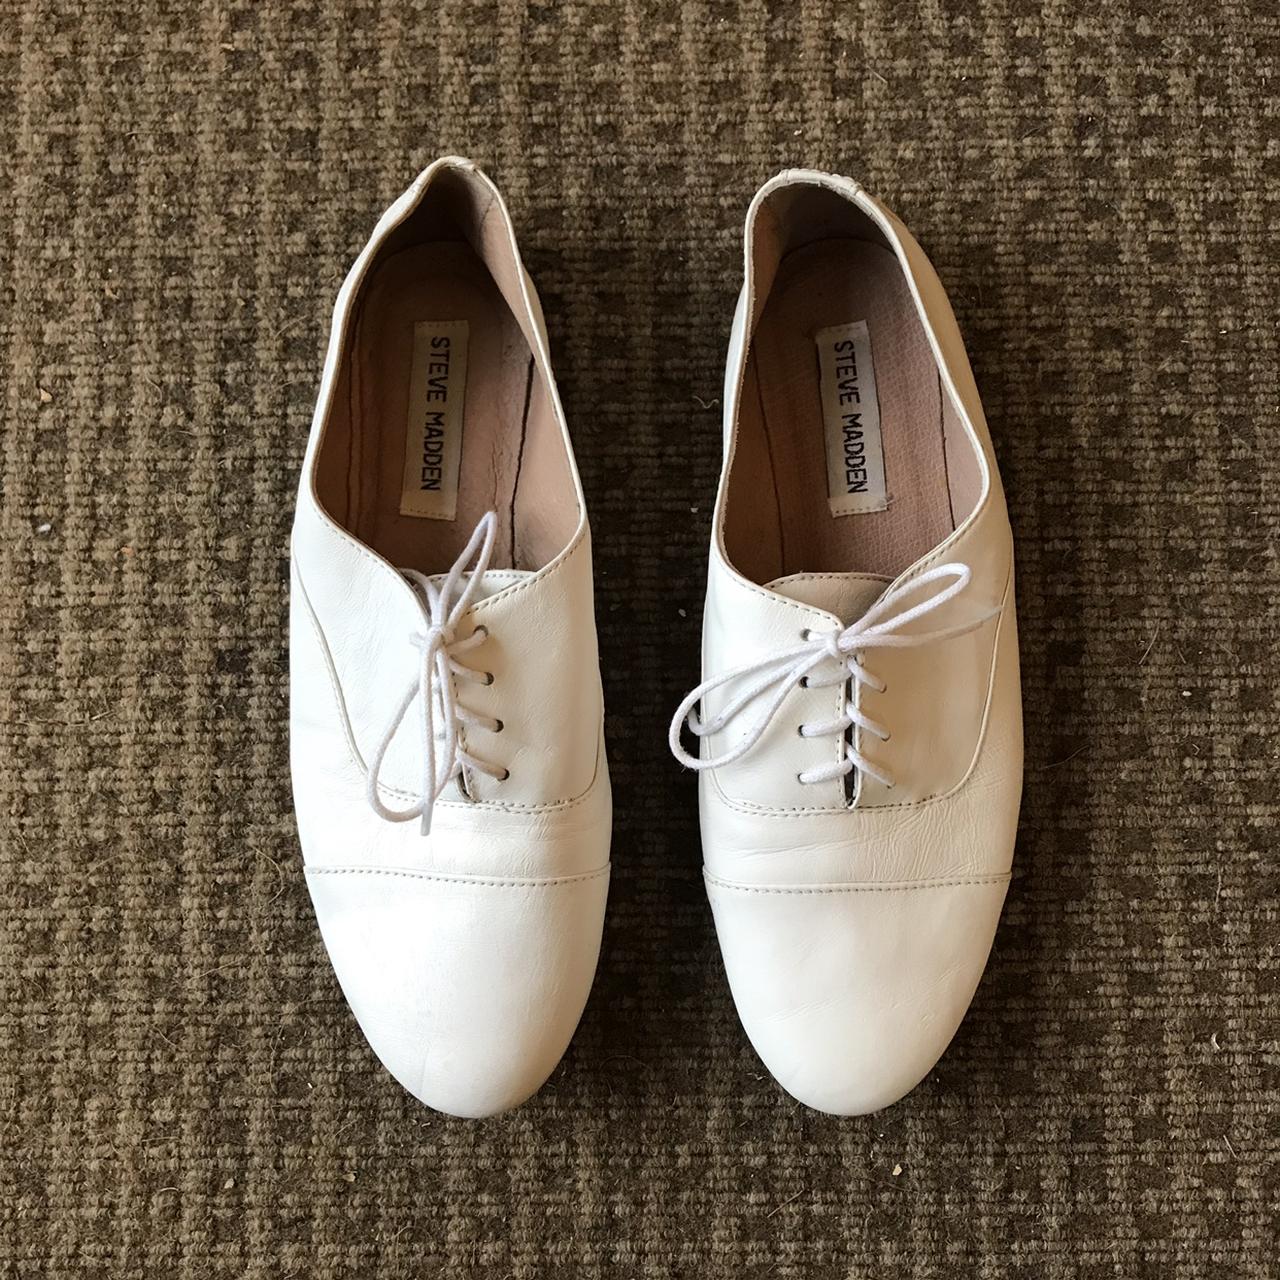 Contemporary white leather lace up flats by Steve... - Depop